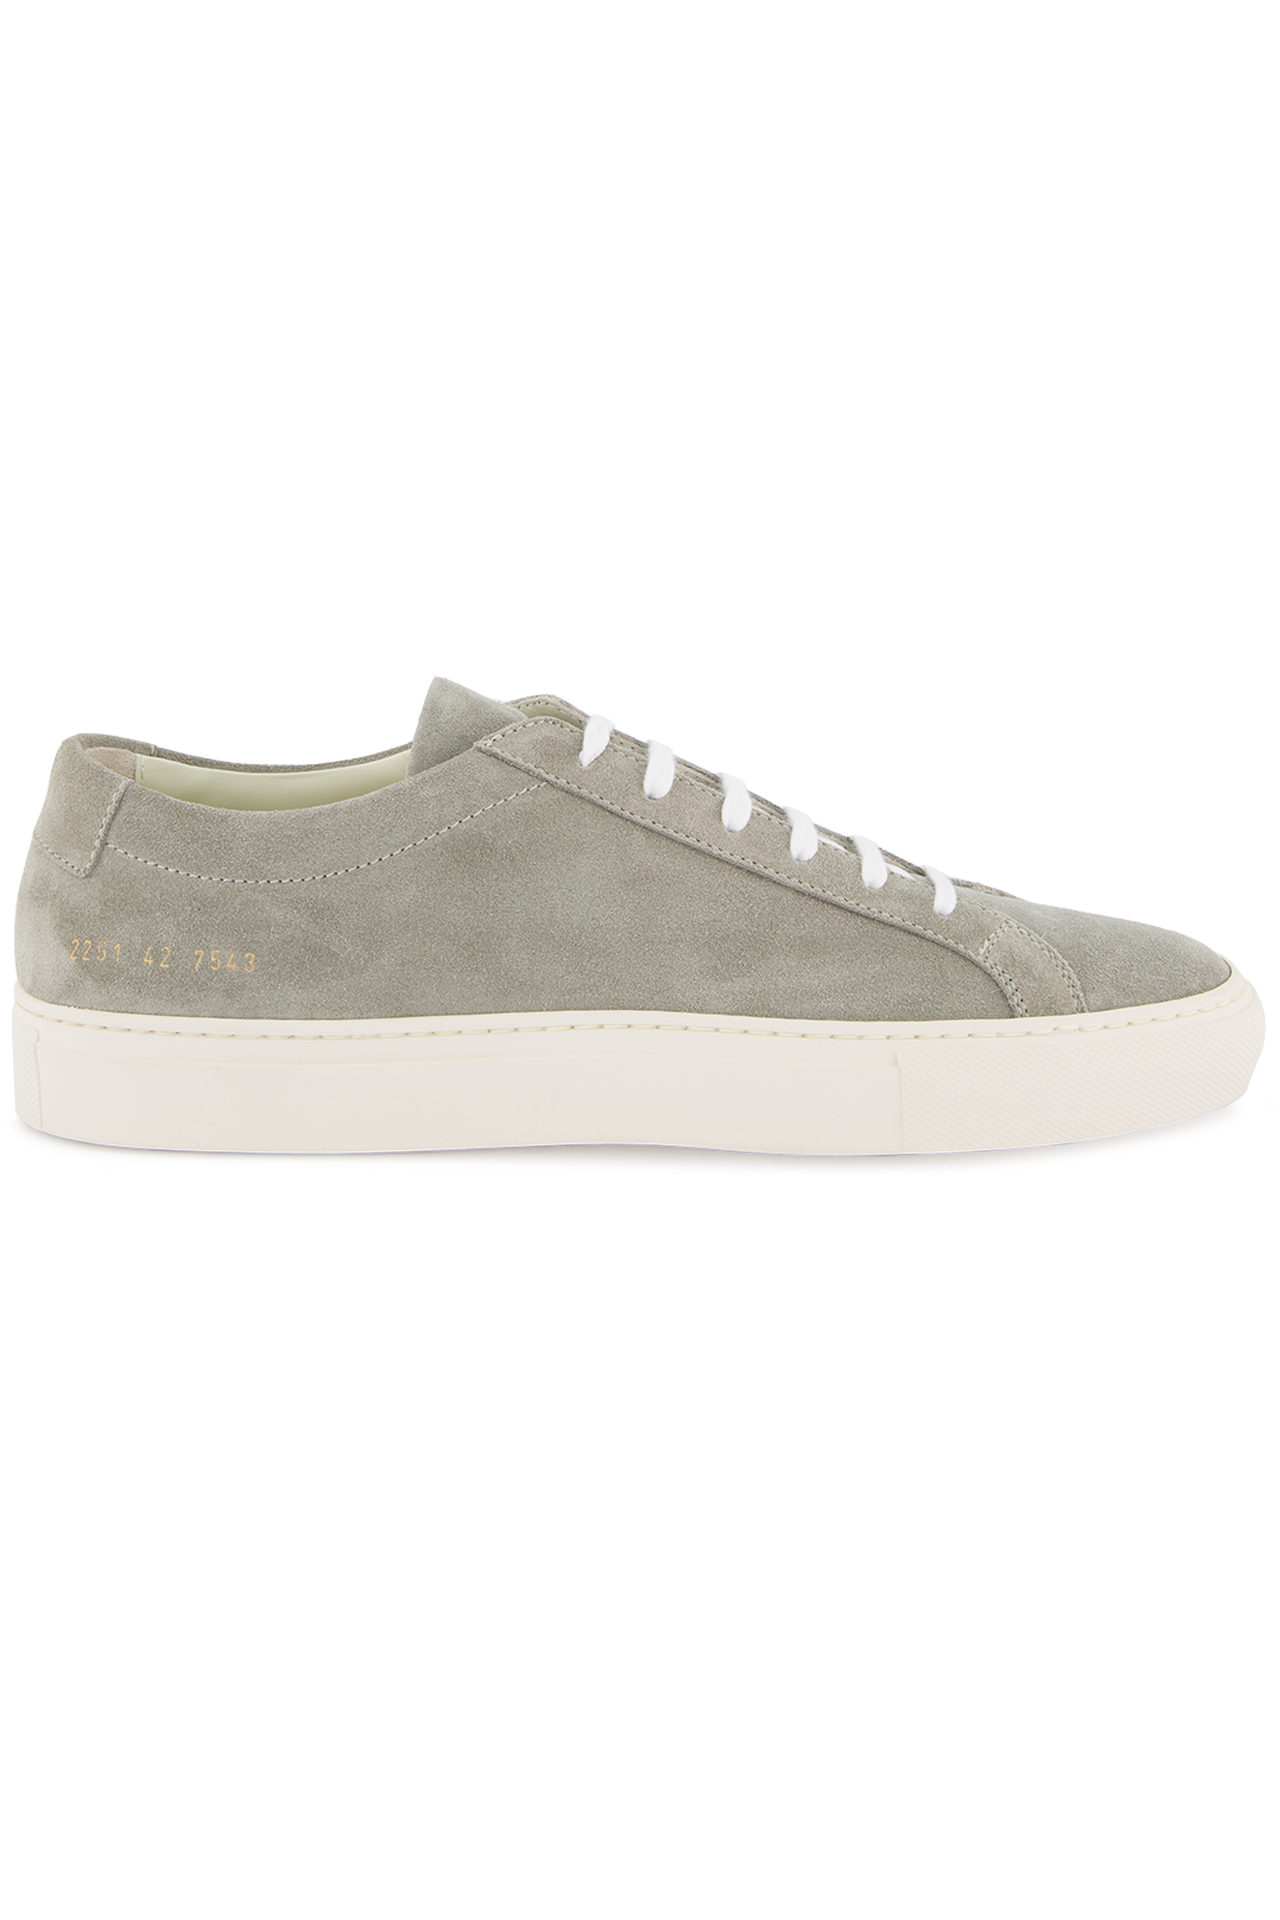 grey suede common projects